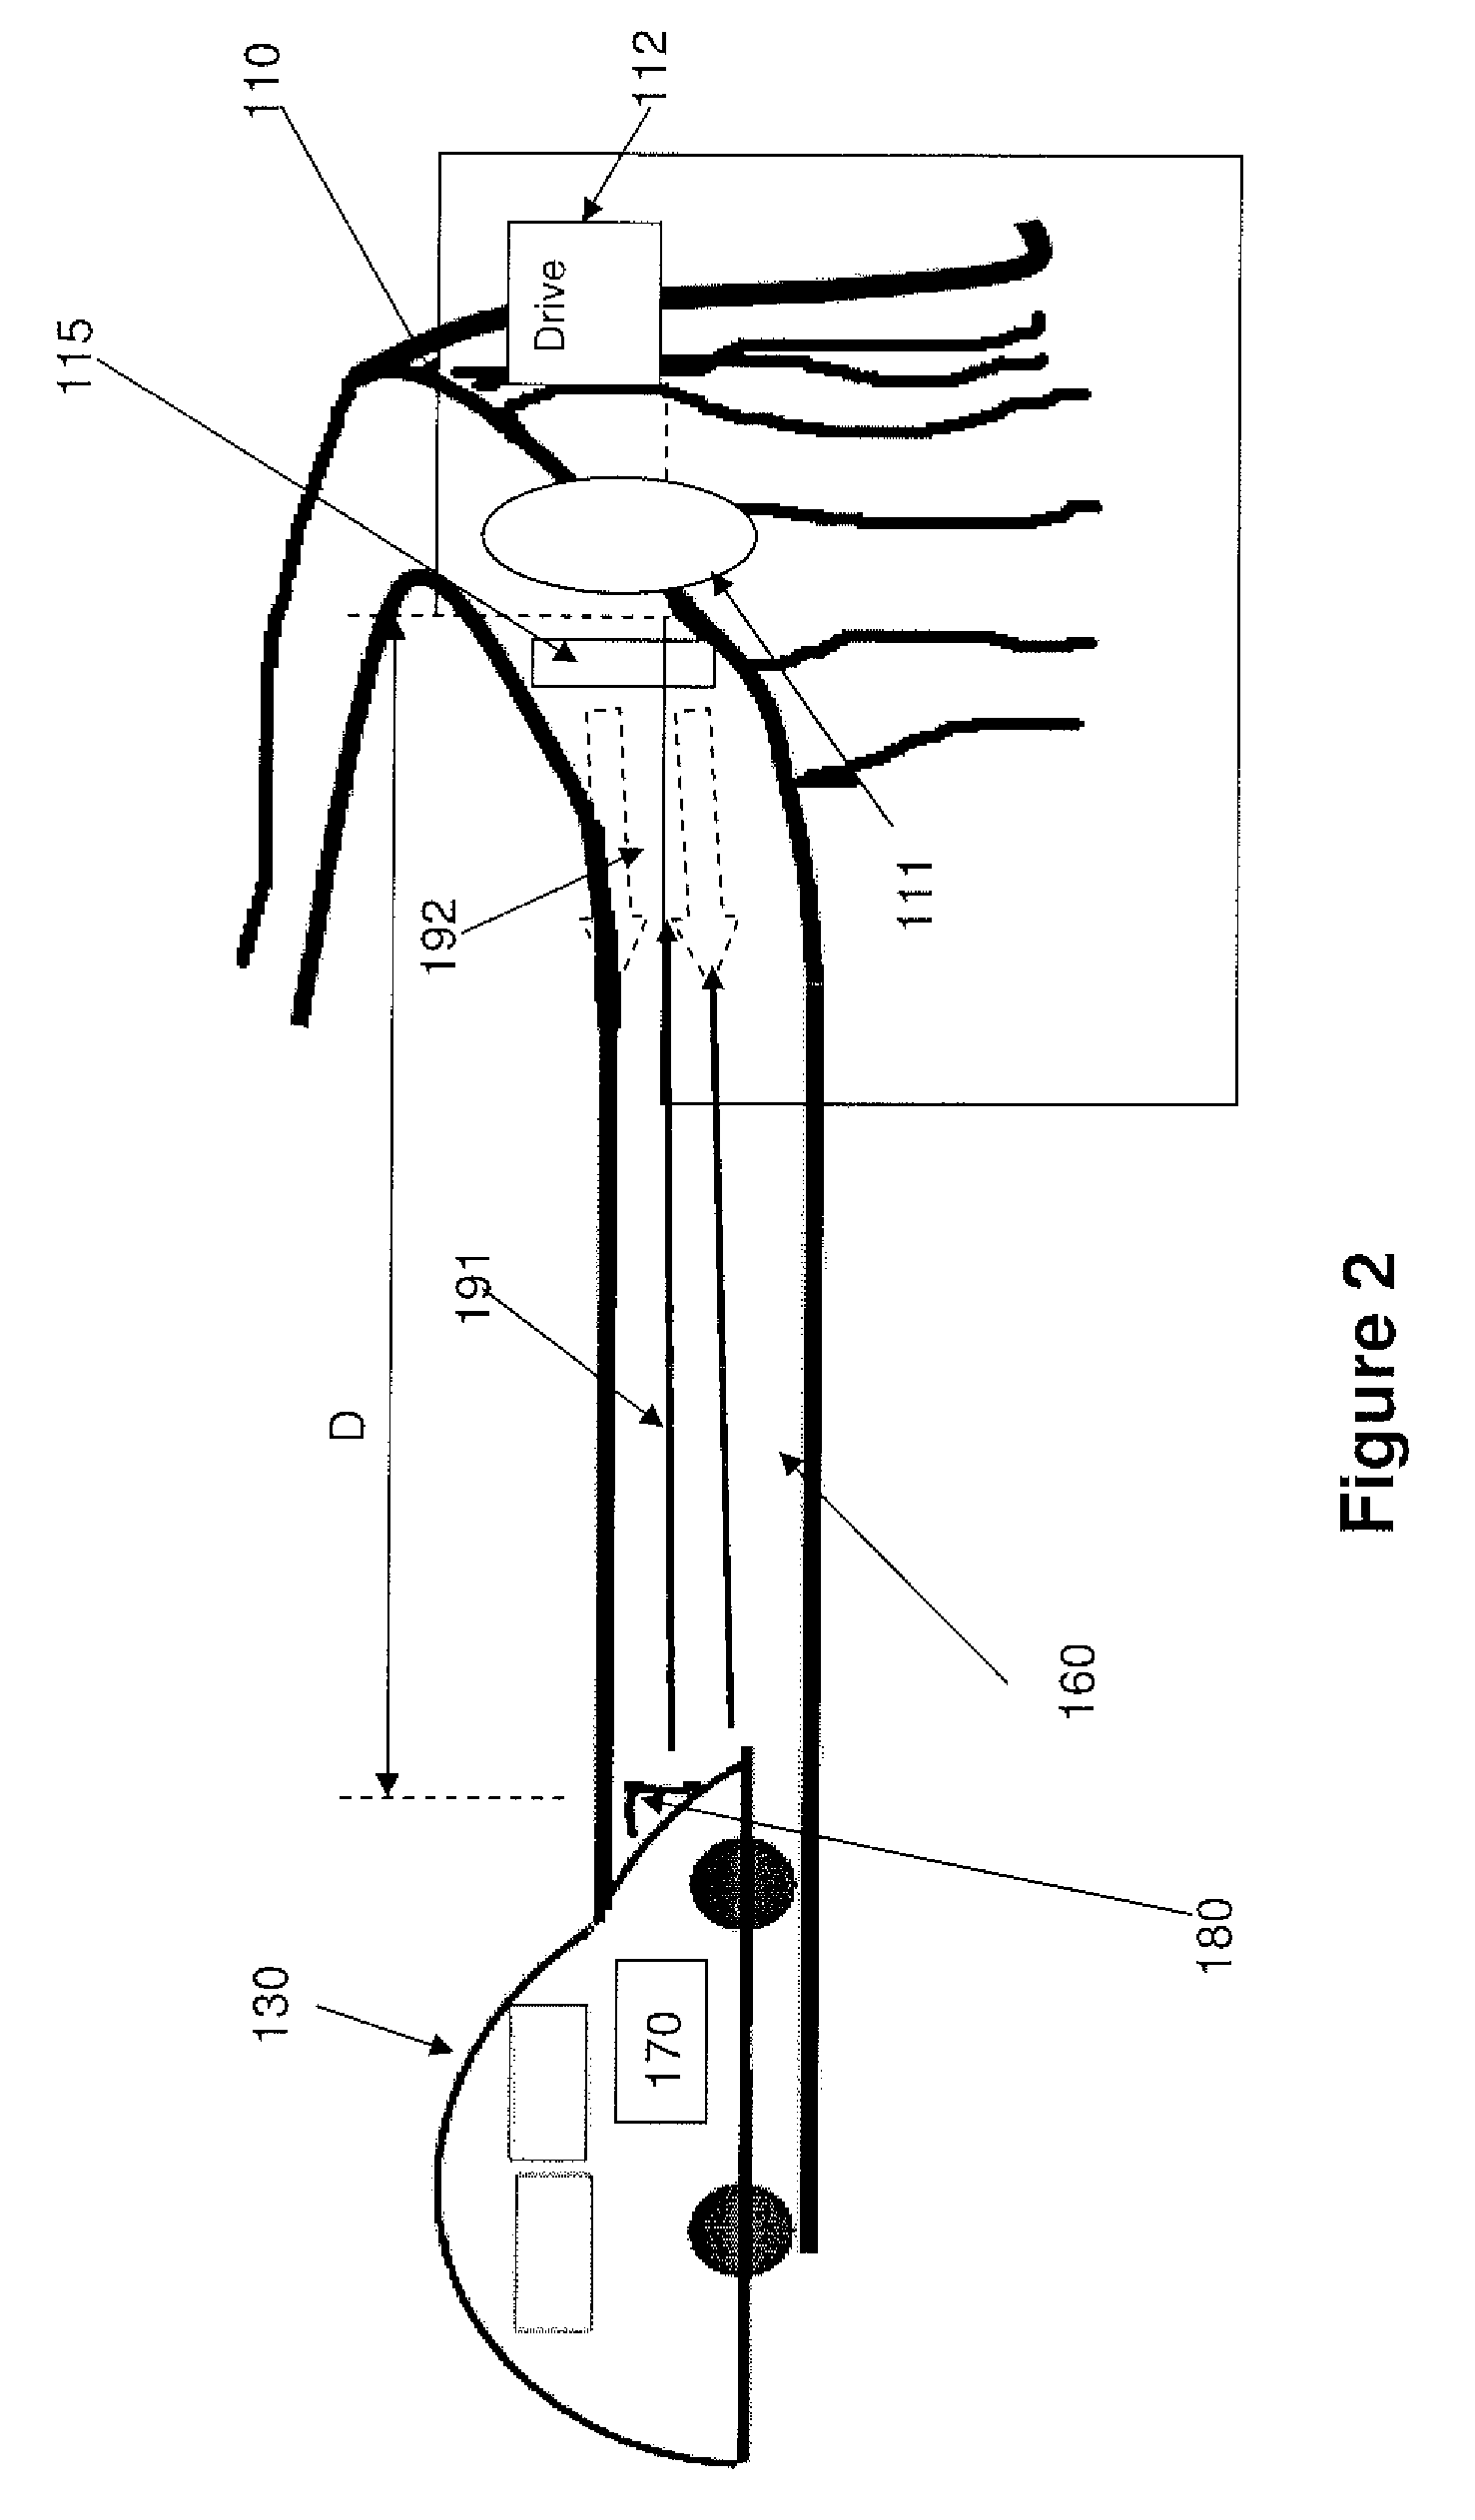 Device, System and Method of Retro-Modulating Safety Signs